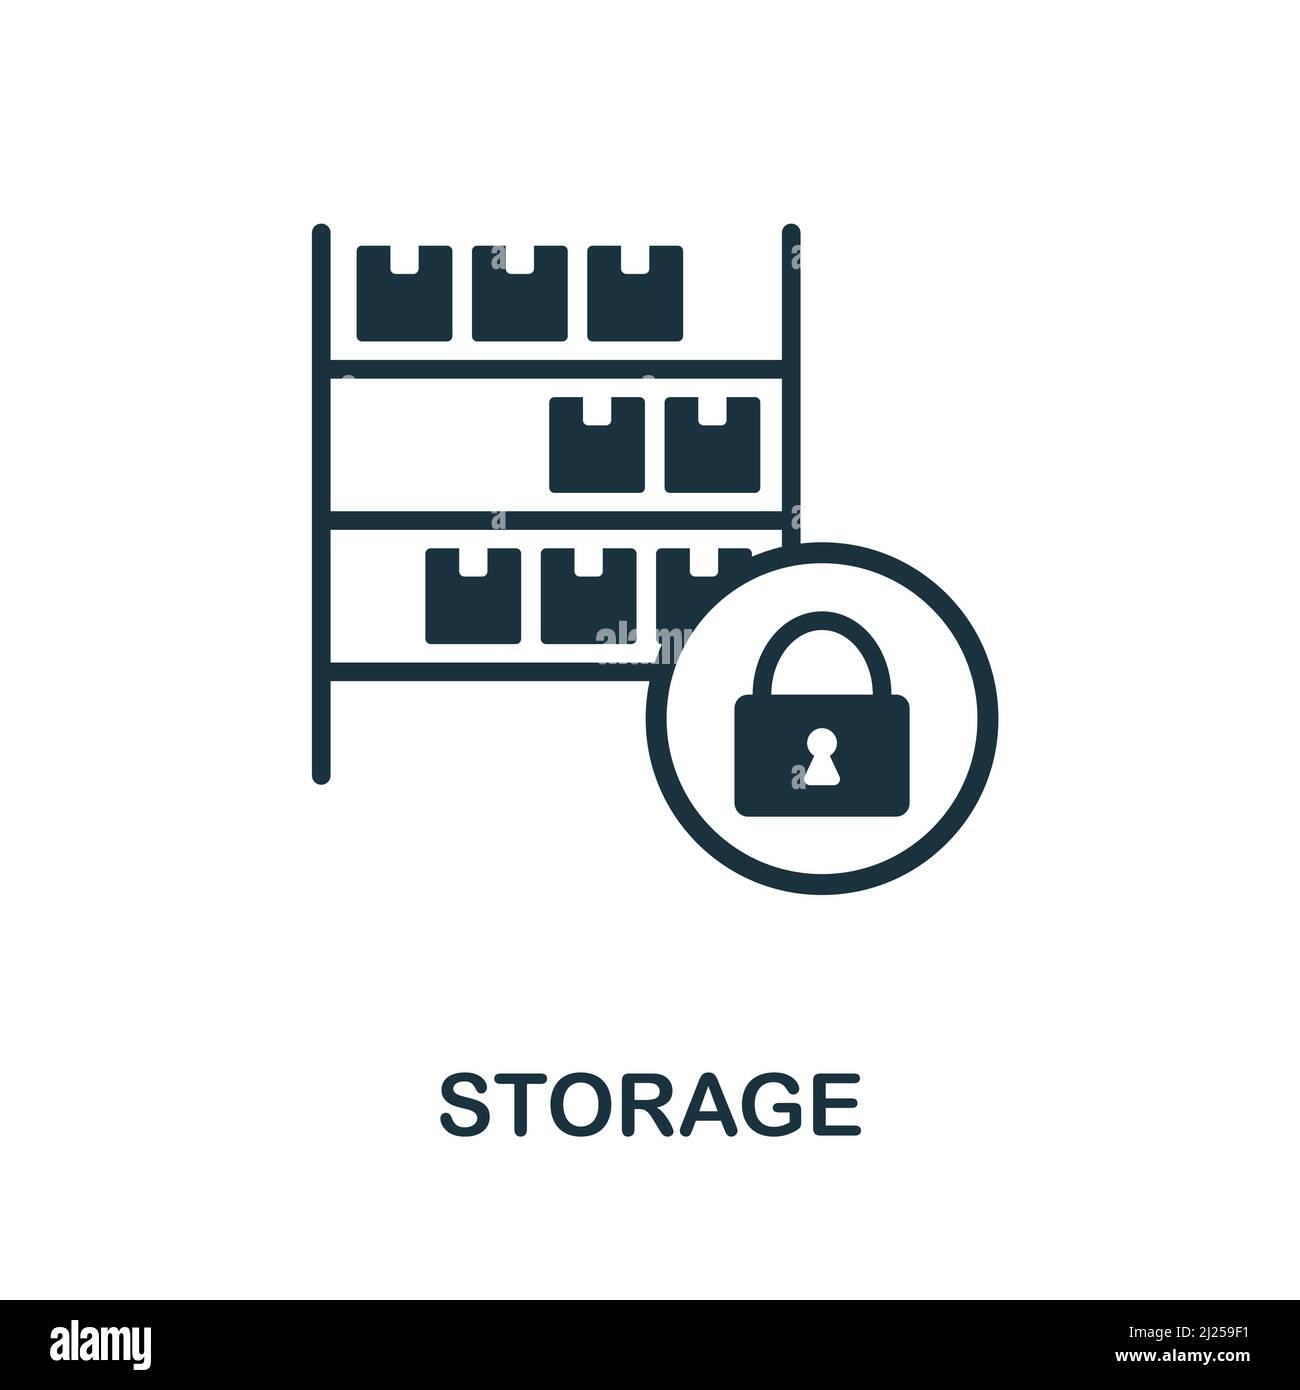 Storage icon. Monochrome simple Storage icon for templates, web design and infographics Stock Vector